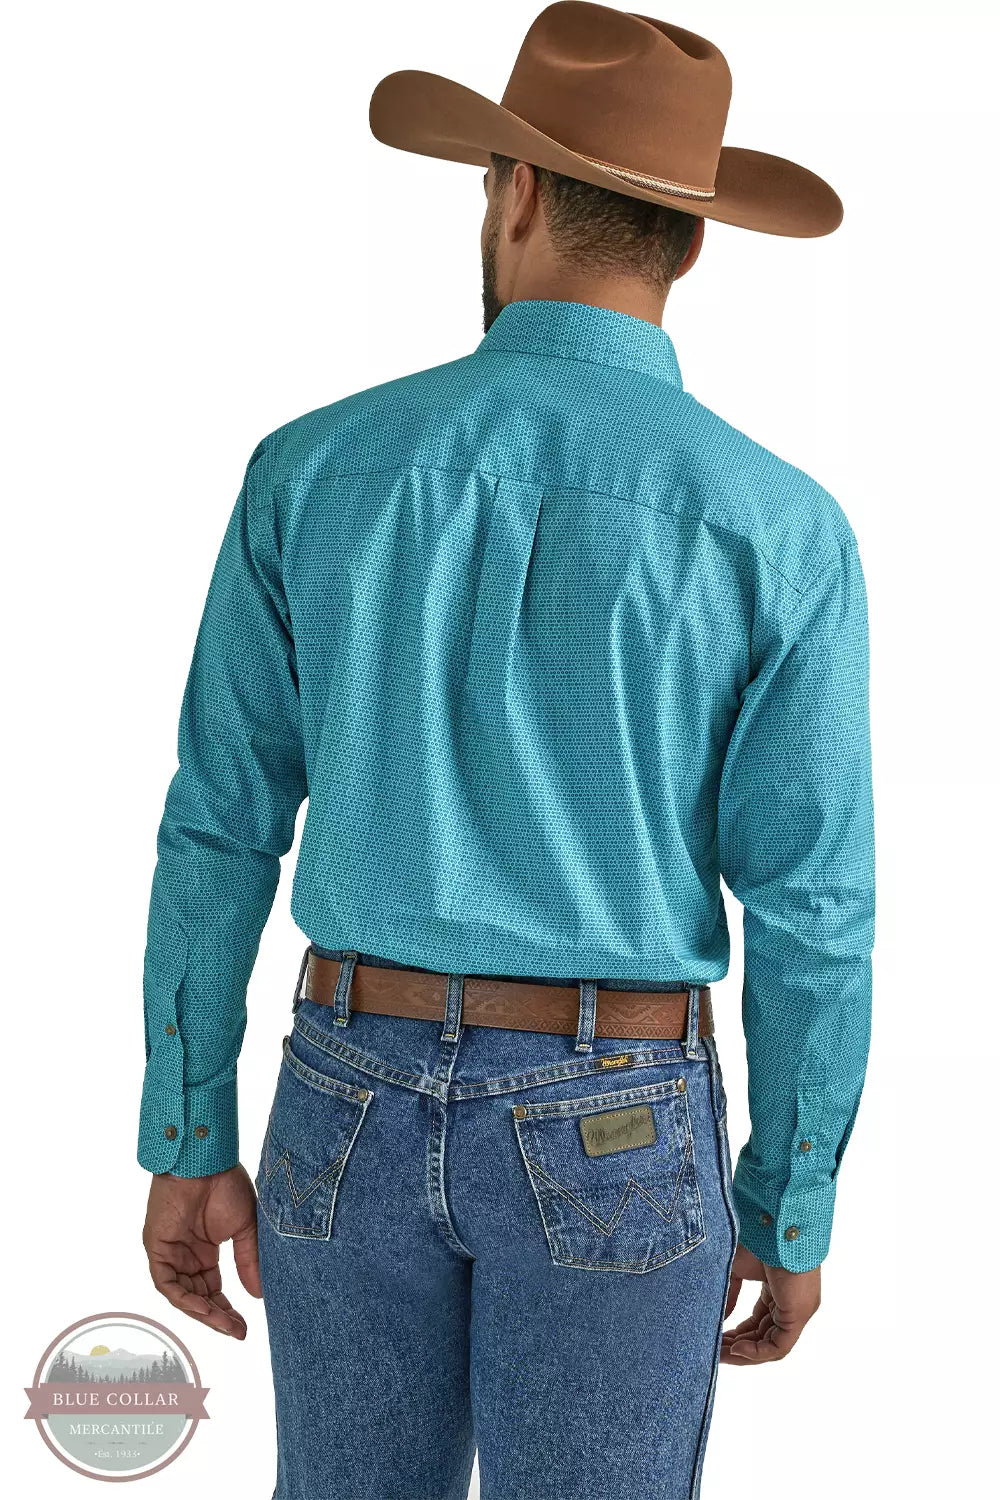 Wrangler 112338088 George Strait Long Sleeve One Pocket Button Down Shirt in Teal Discs Back View